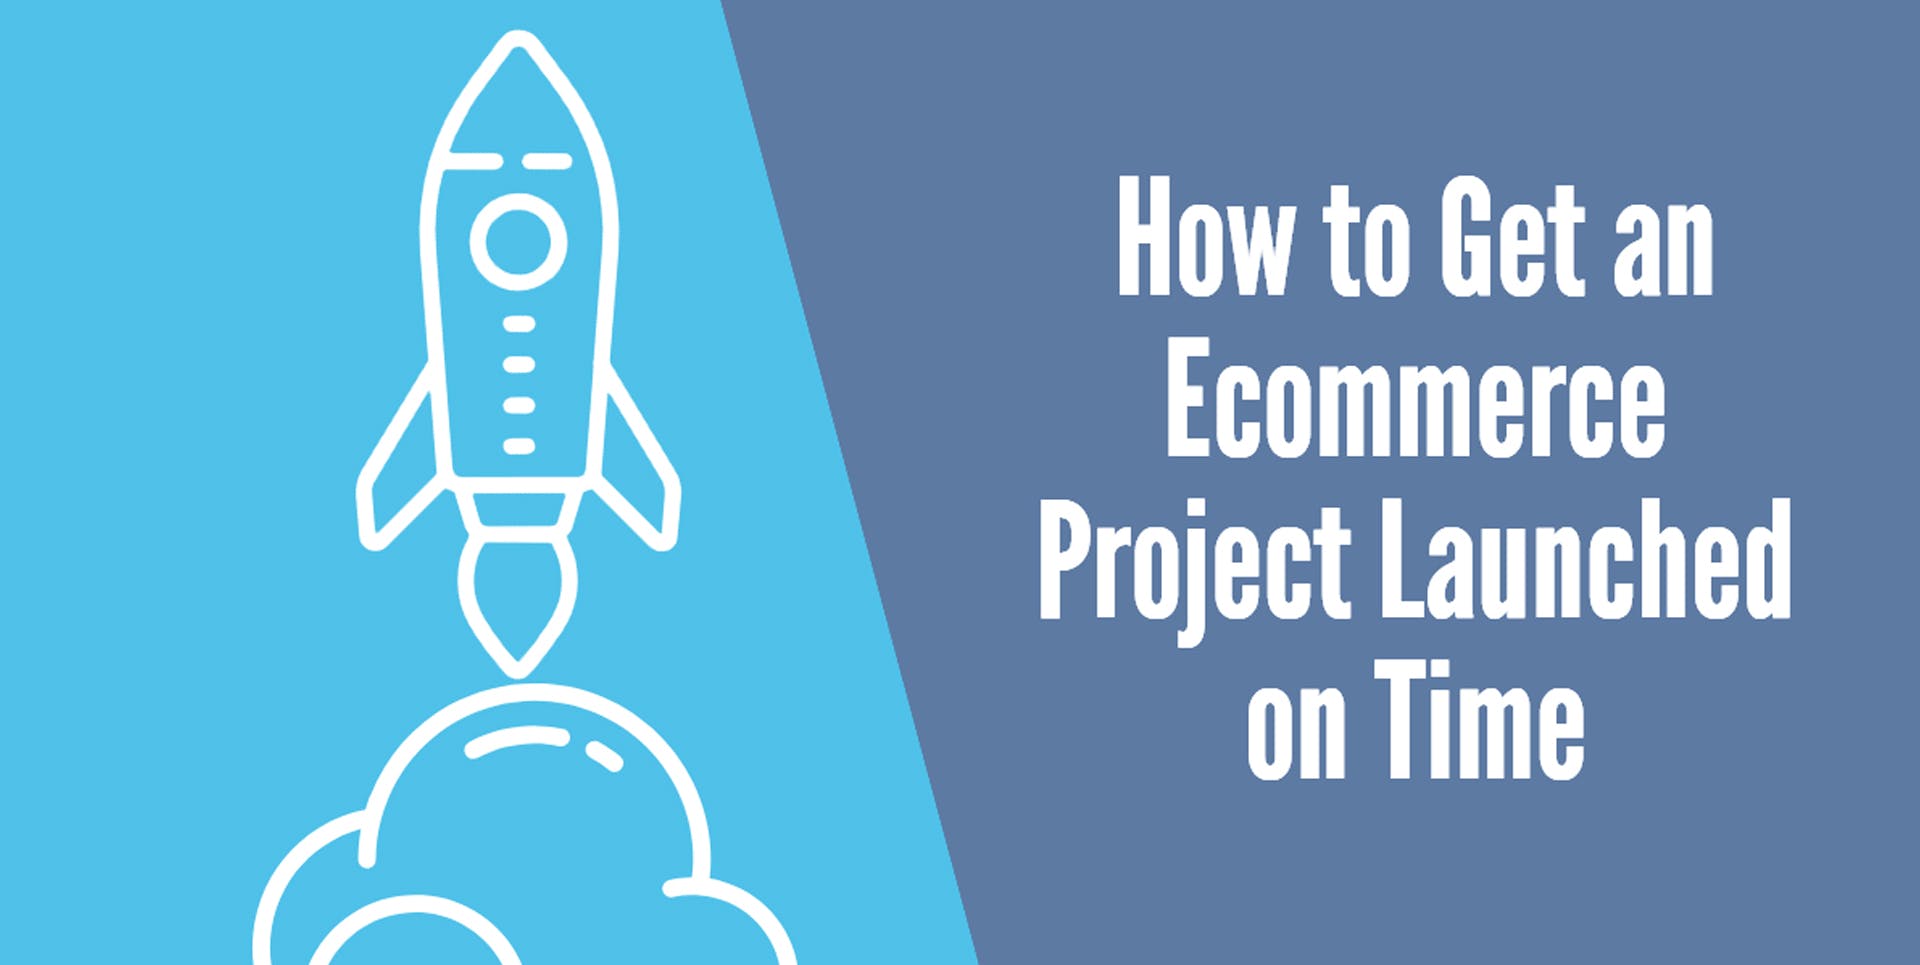 How to Get an Ecommerce Project Launched on Time